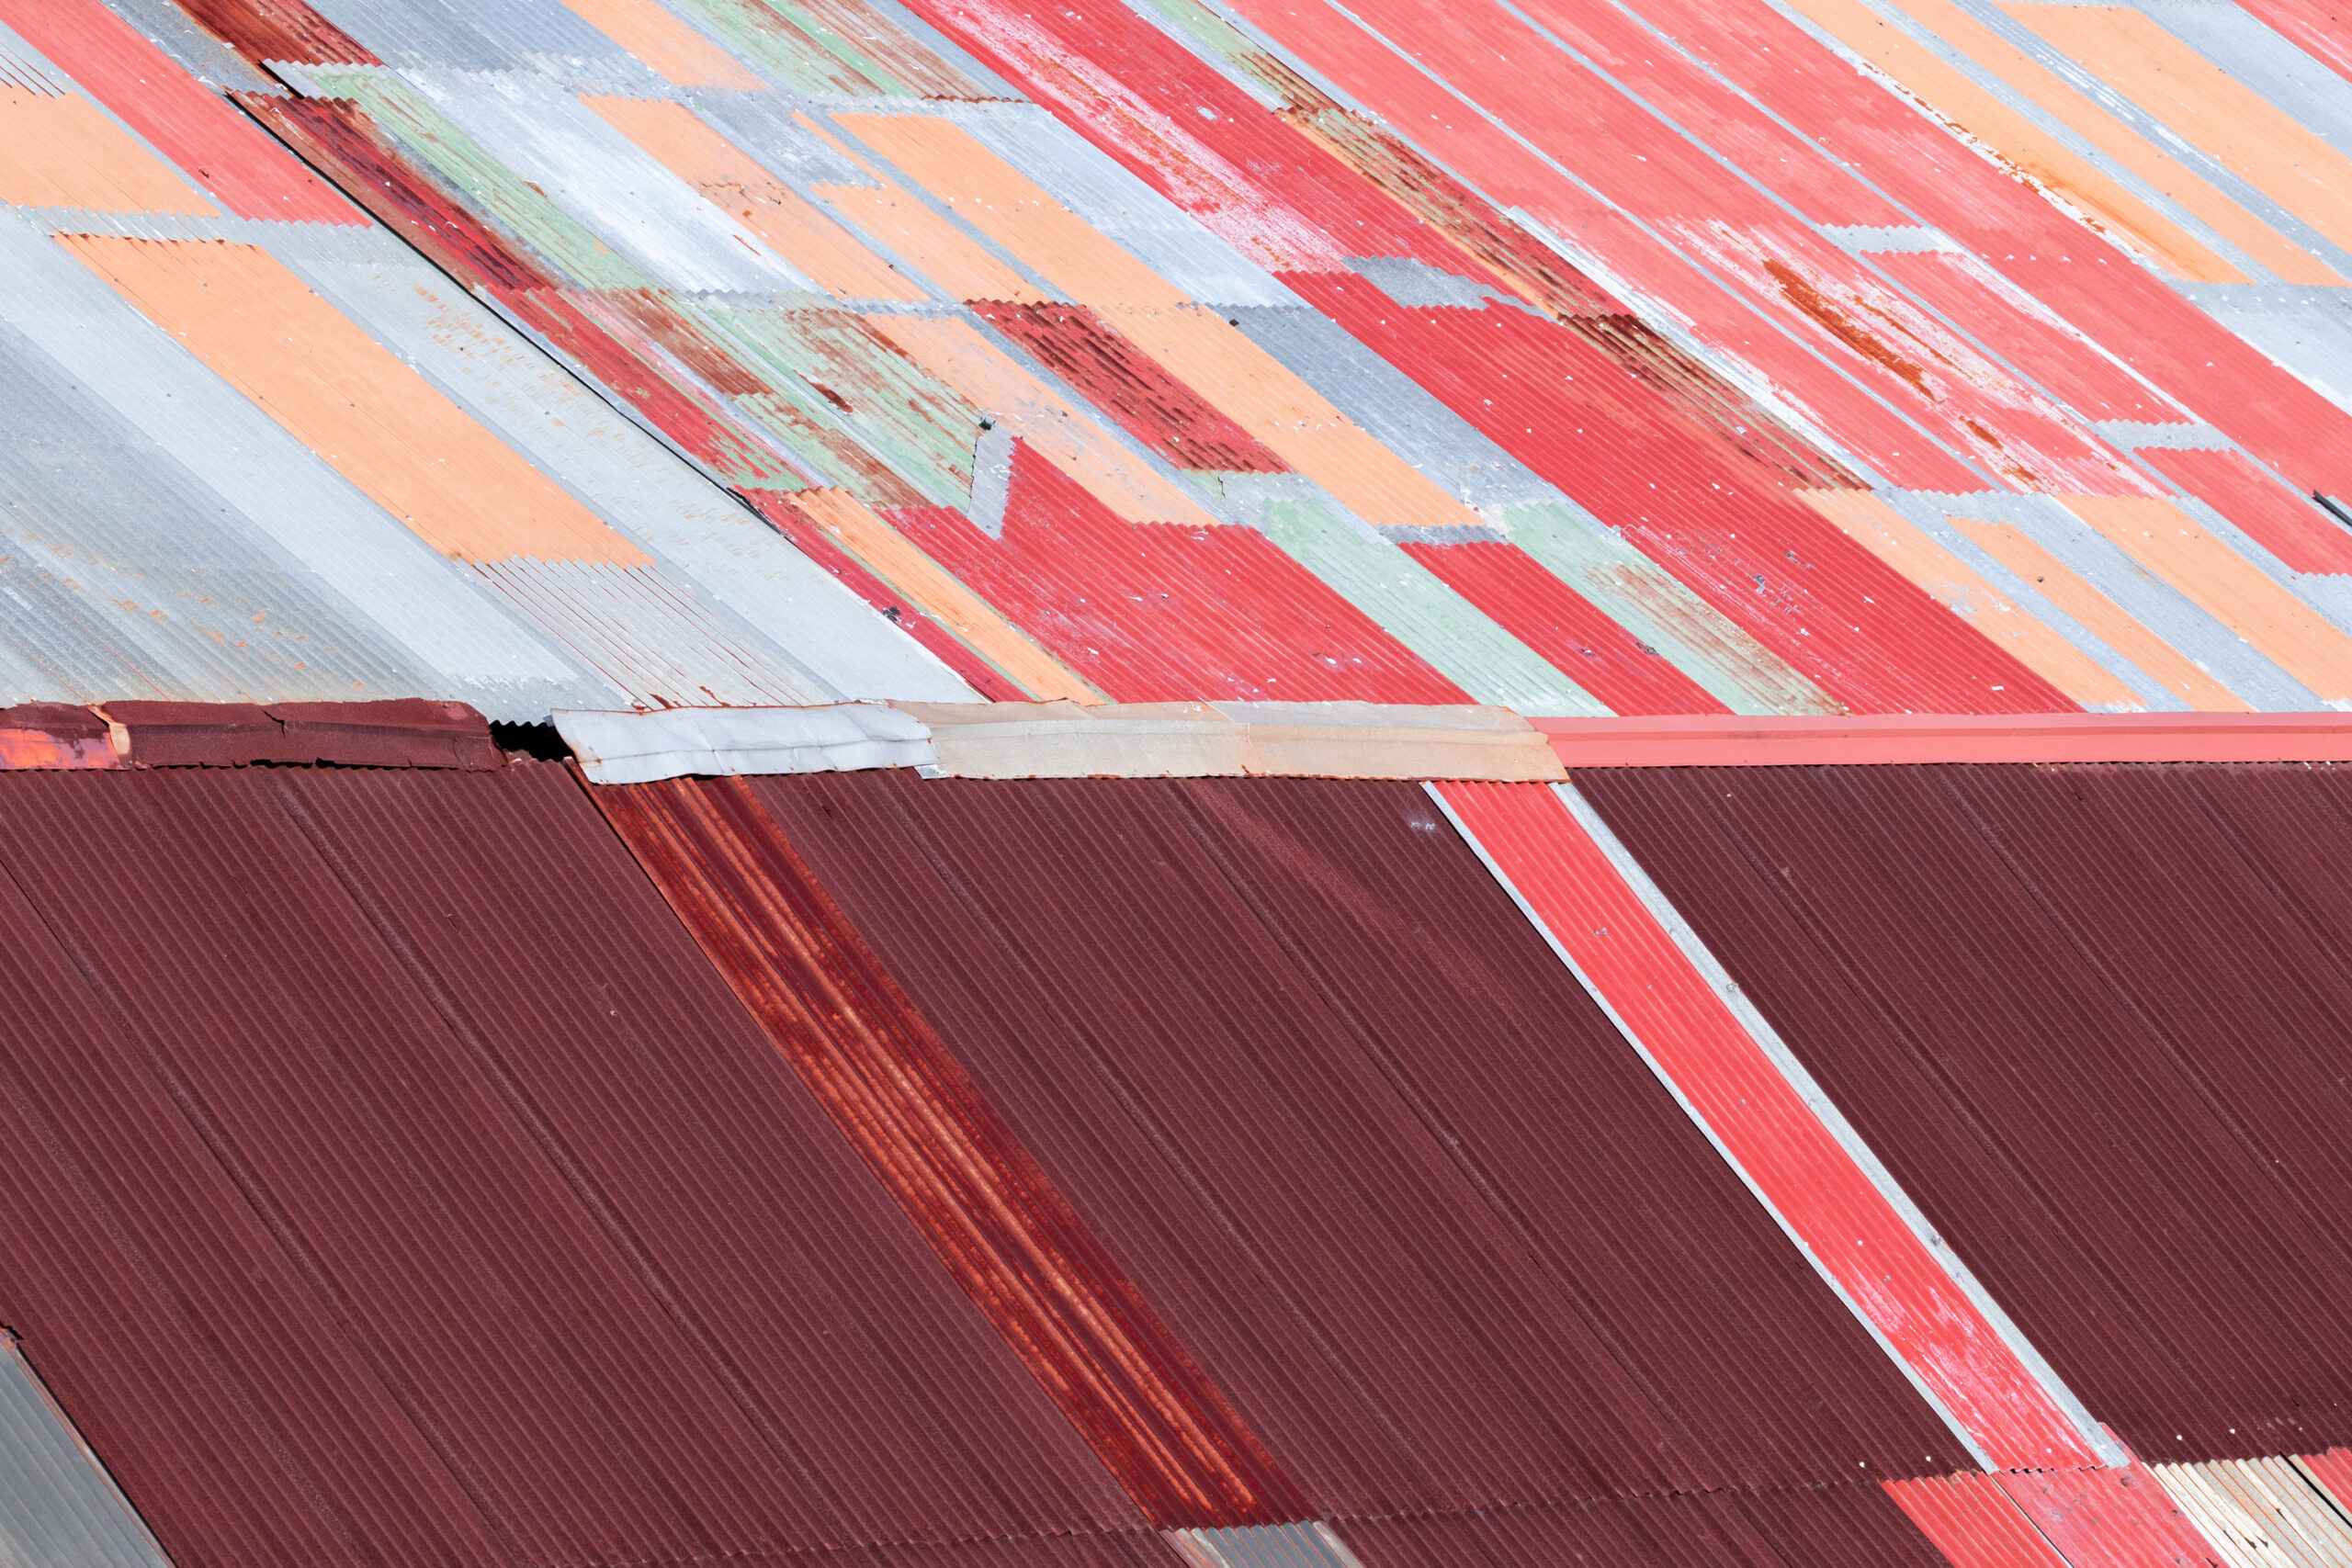 Geometric, abstract rooftop with red, peach and grey colours, showcasing Leonardo Ureña's graphic design background.